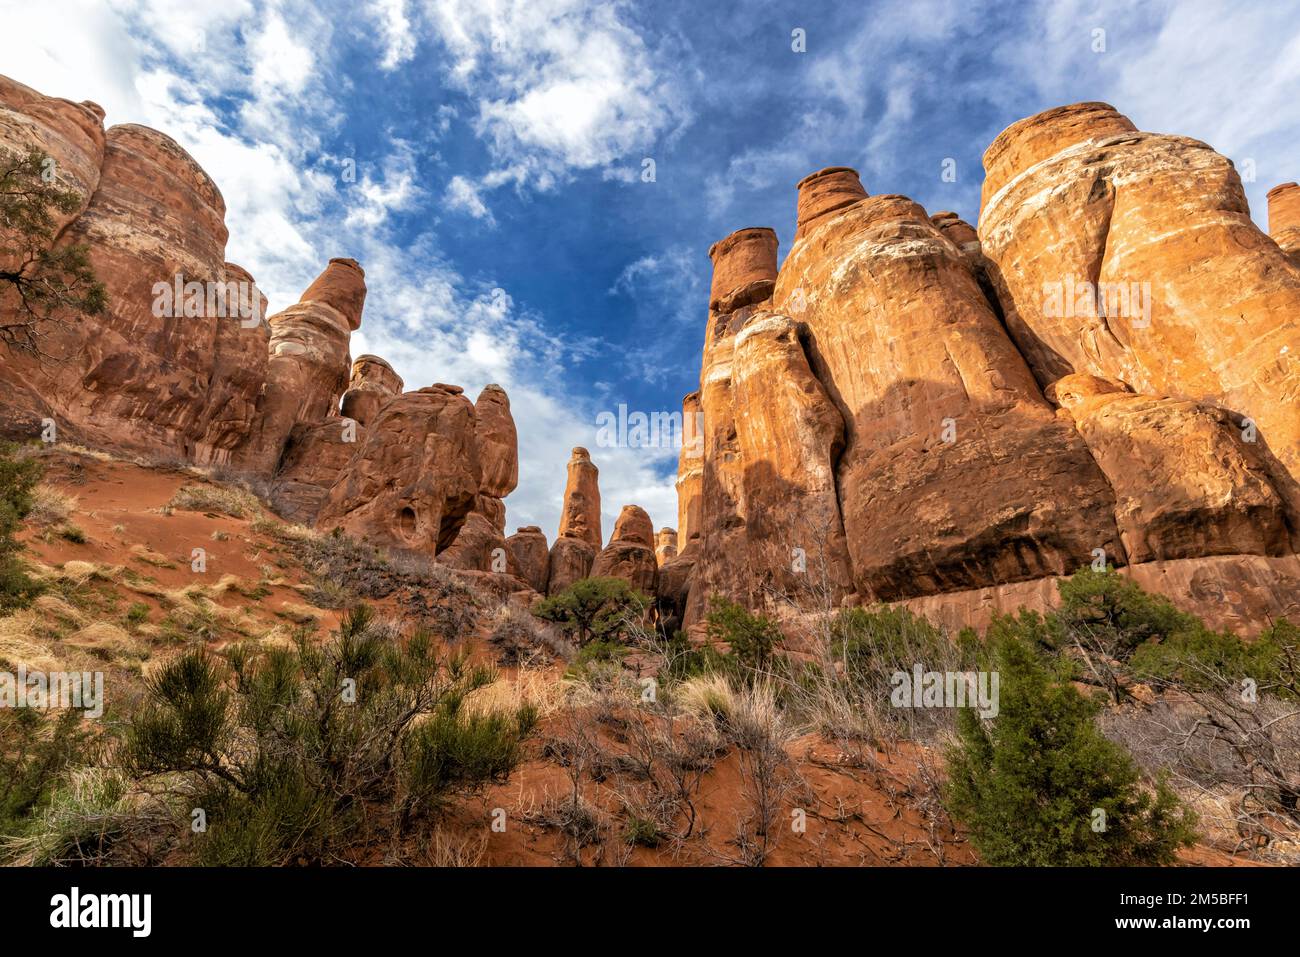 Two rows of fins cross above sandy dunes in the Fiery Furnace in Arches National Park near Moab, Utah. Stock Photo